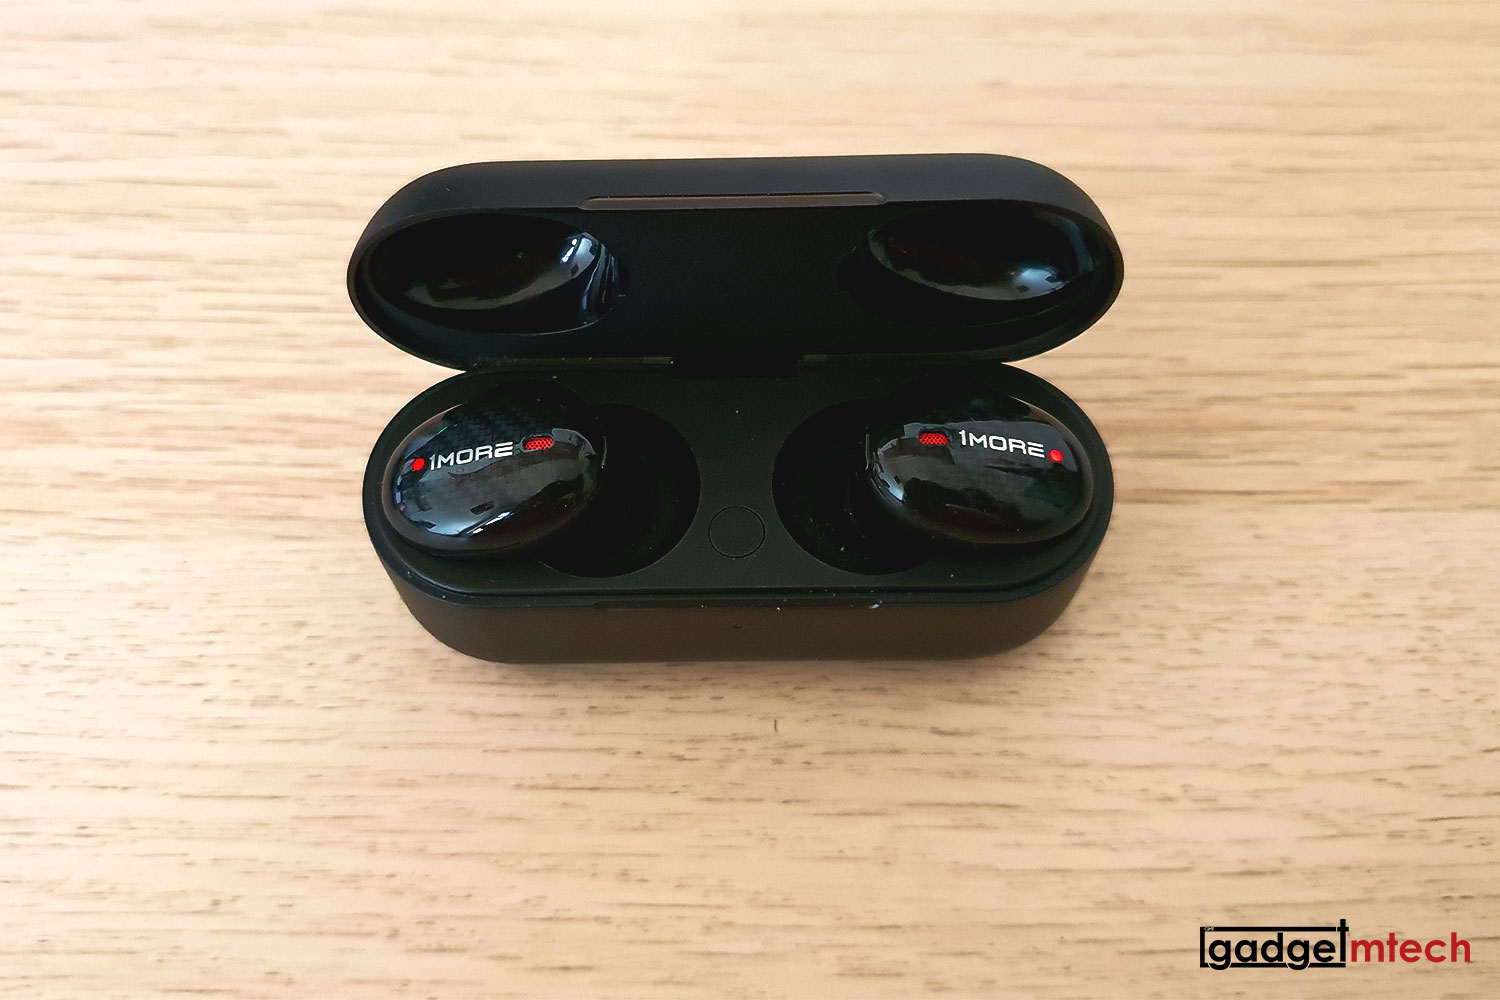 1MORE True Wireless ANC In-Ear Headphones Review_11